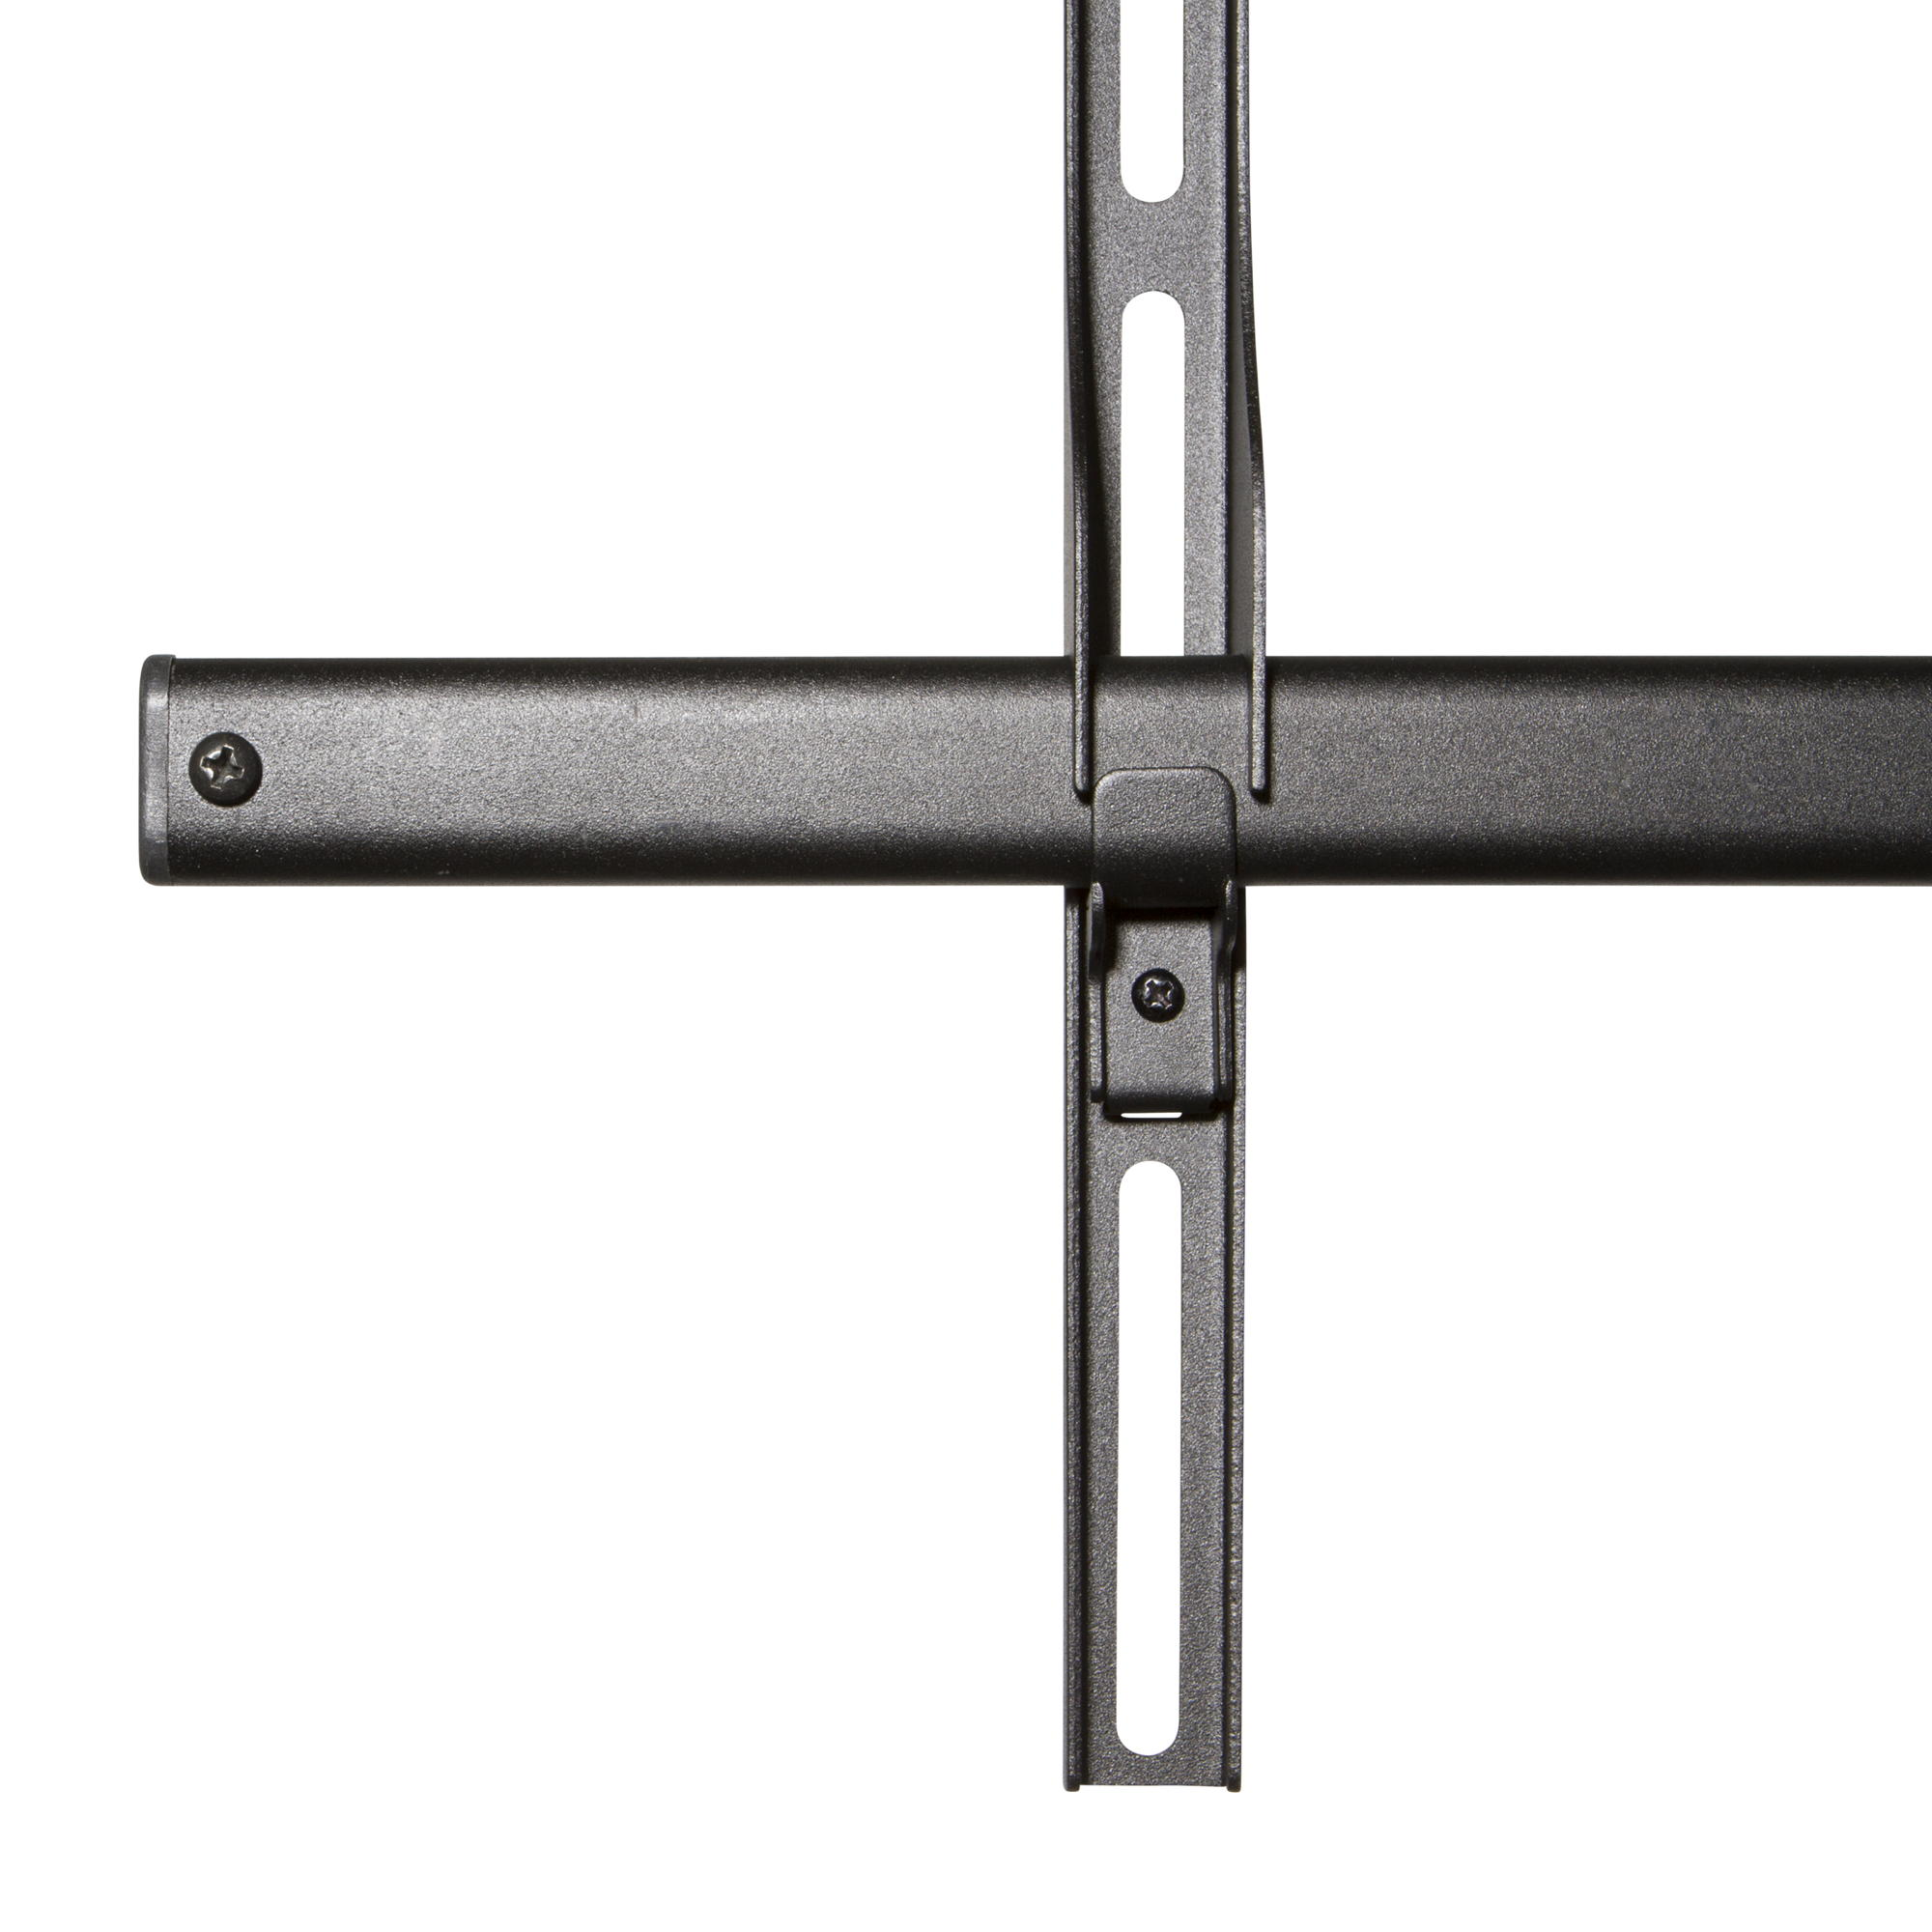 Kanto FMX3C Full Motion TV Wall Mount for 40-inch to 90-inch TVs, Black